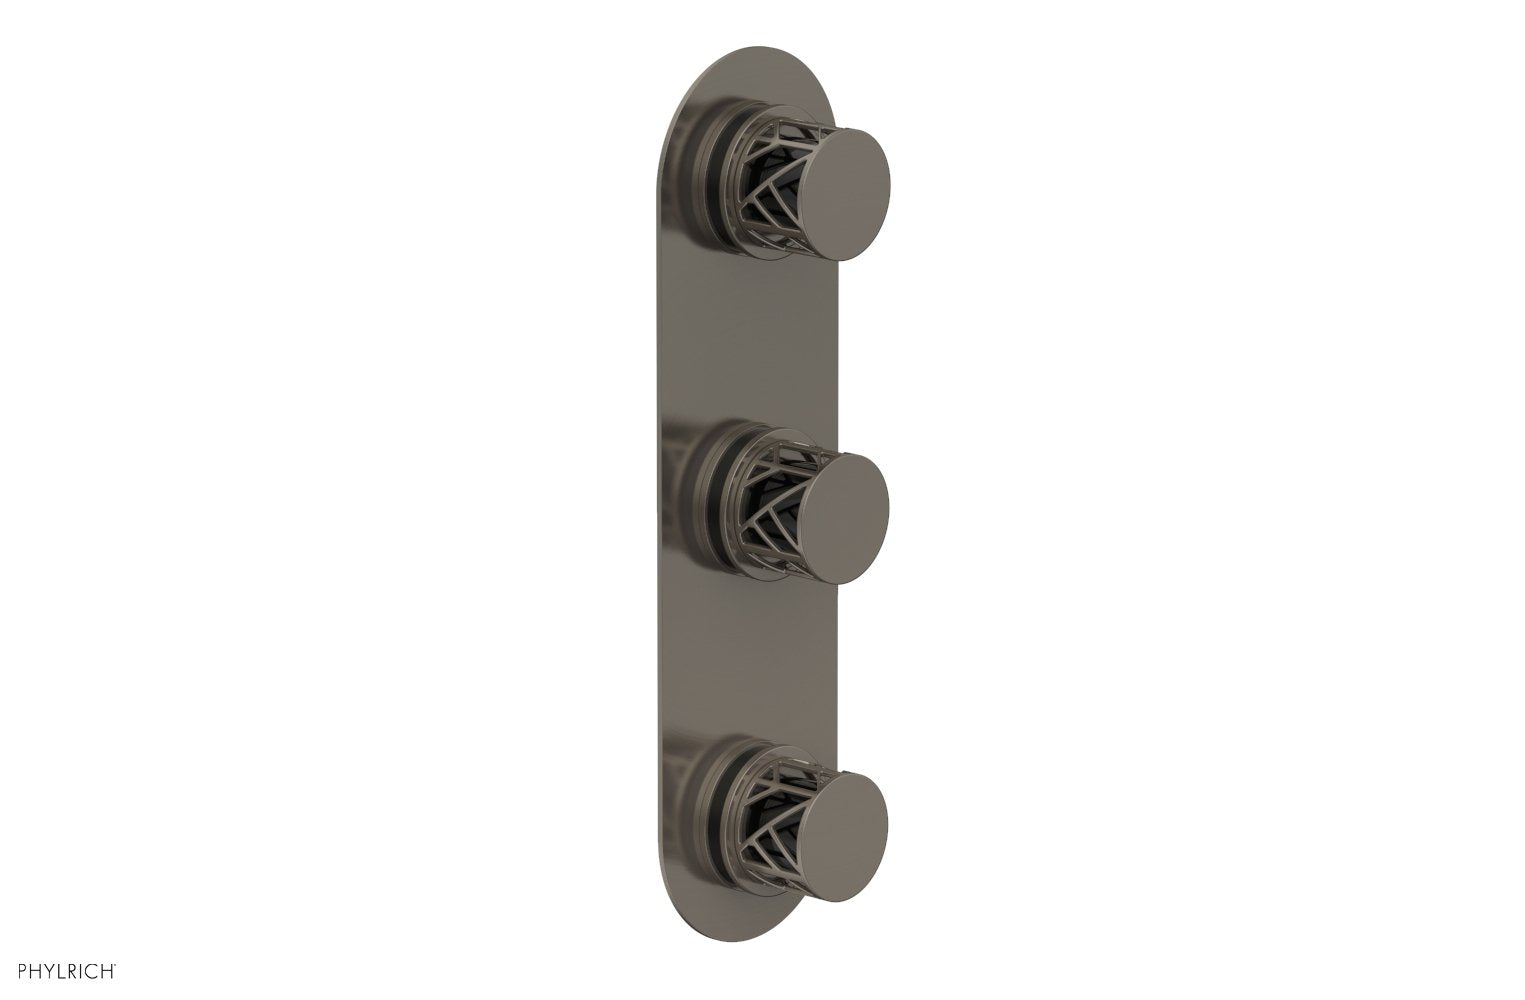 Phylrich JOLIE Thermostatic Valve with Two Volume Control with "Black" Accents